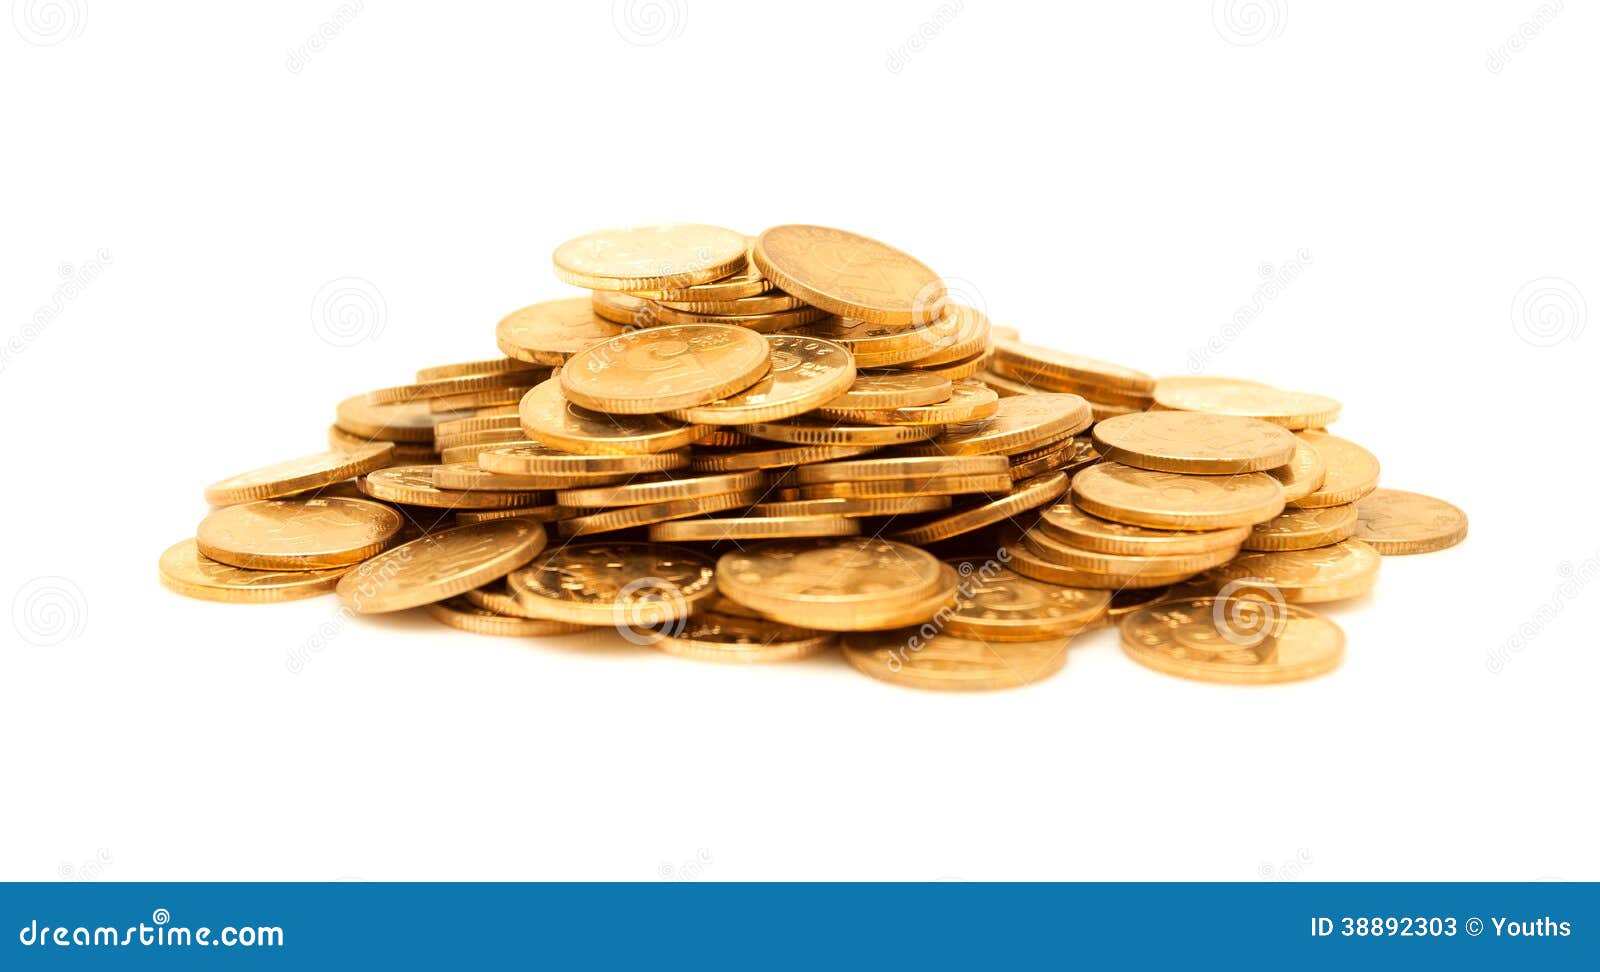 a pile of gold coins  on white background